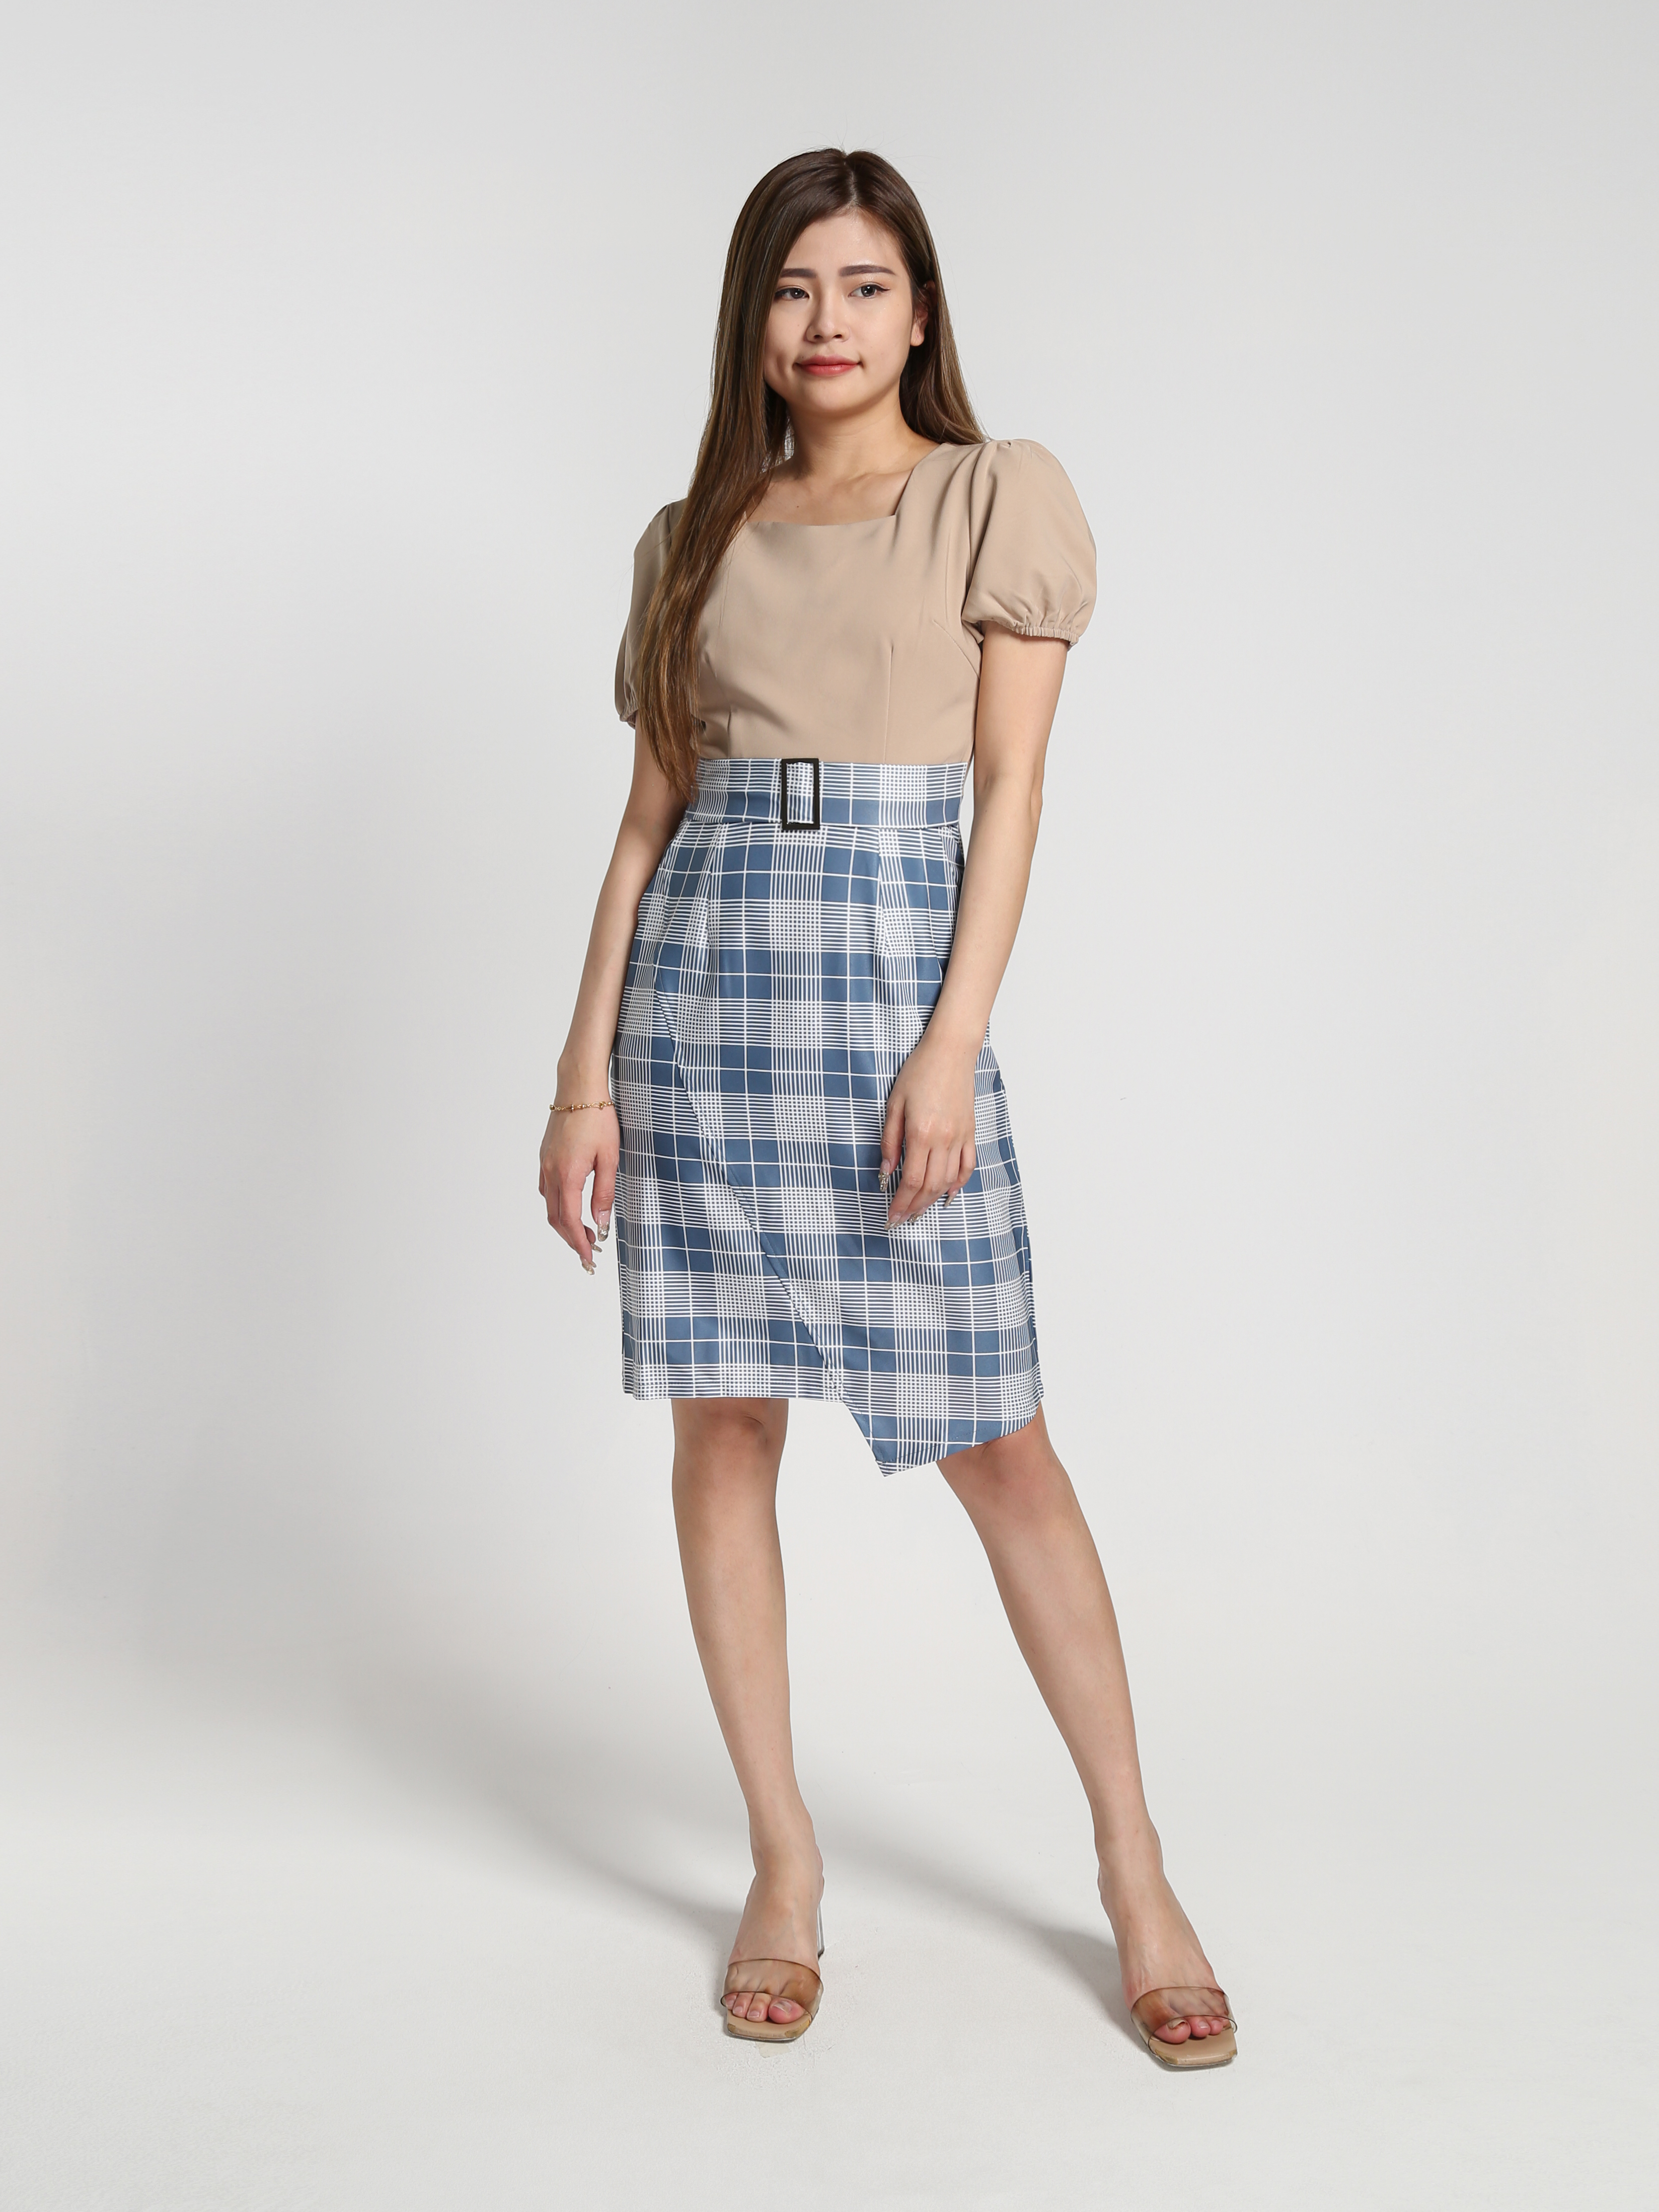 Two Tone Puff Sleeve With Plaid Bottom Dress 27233